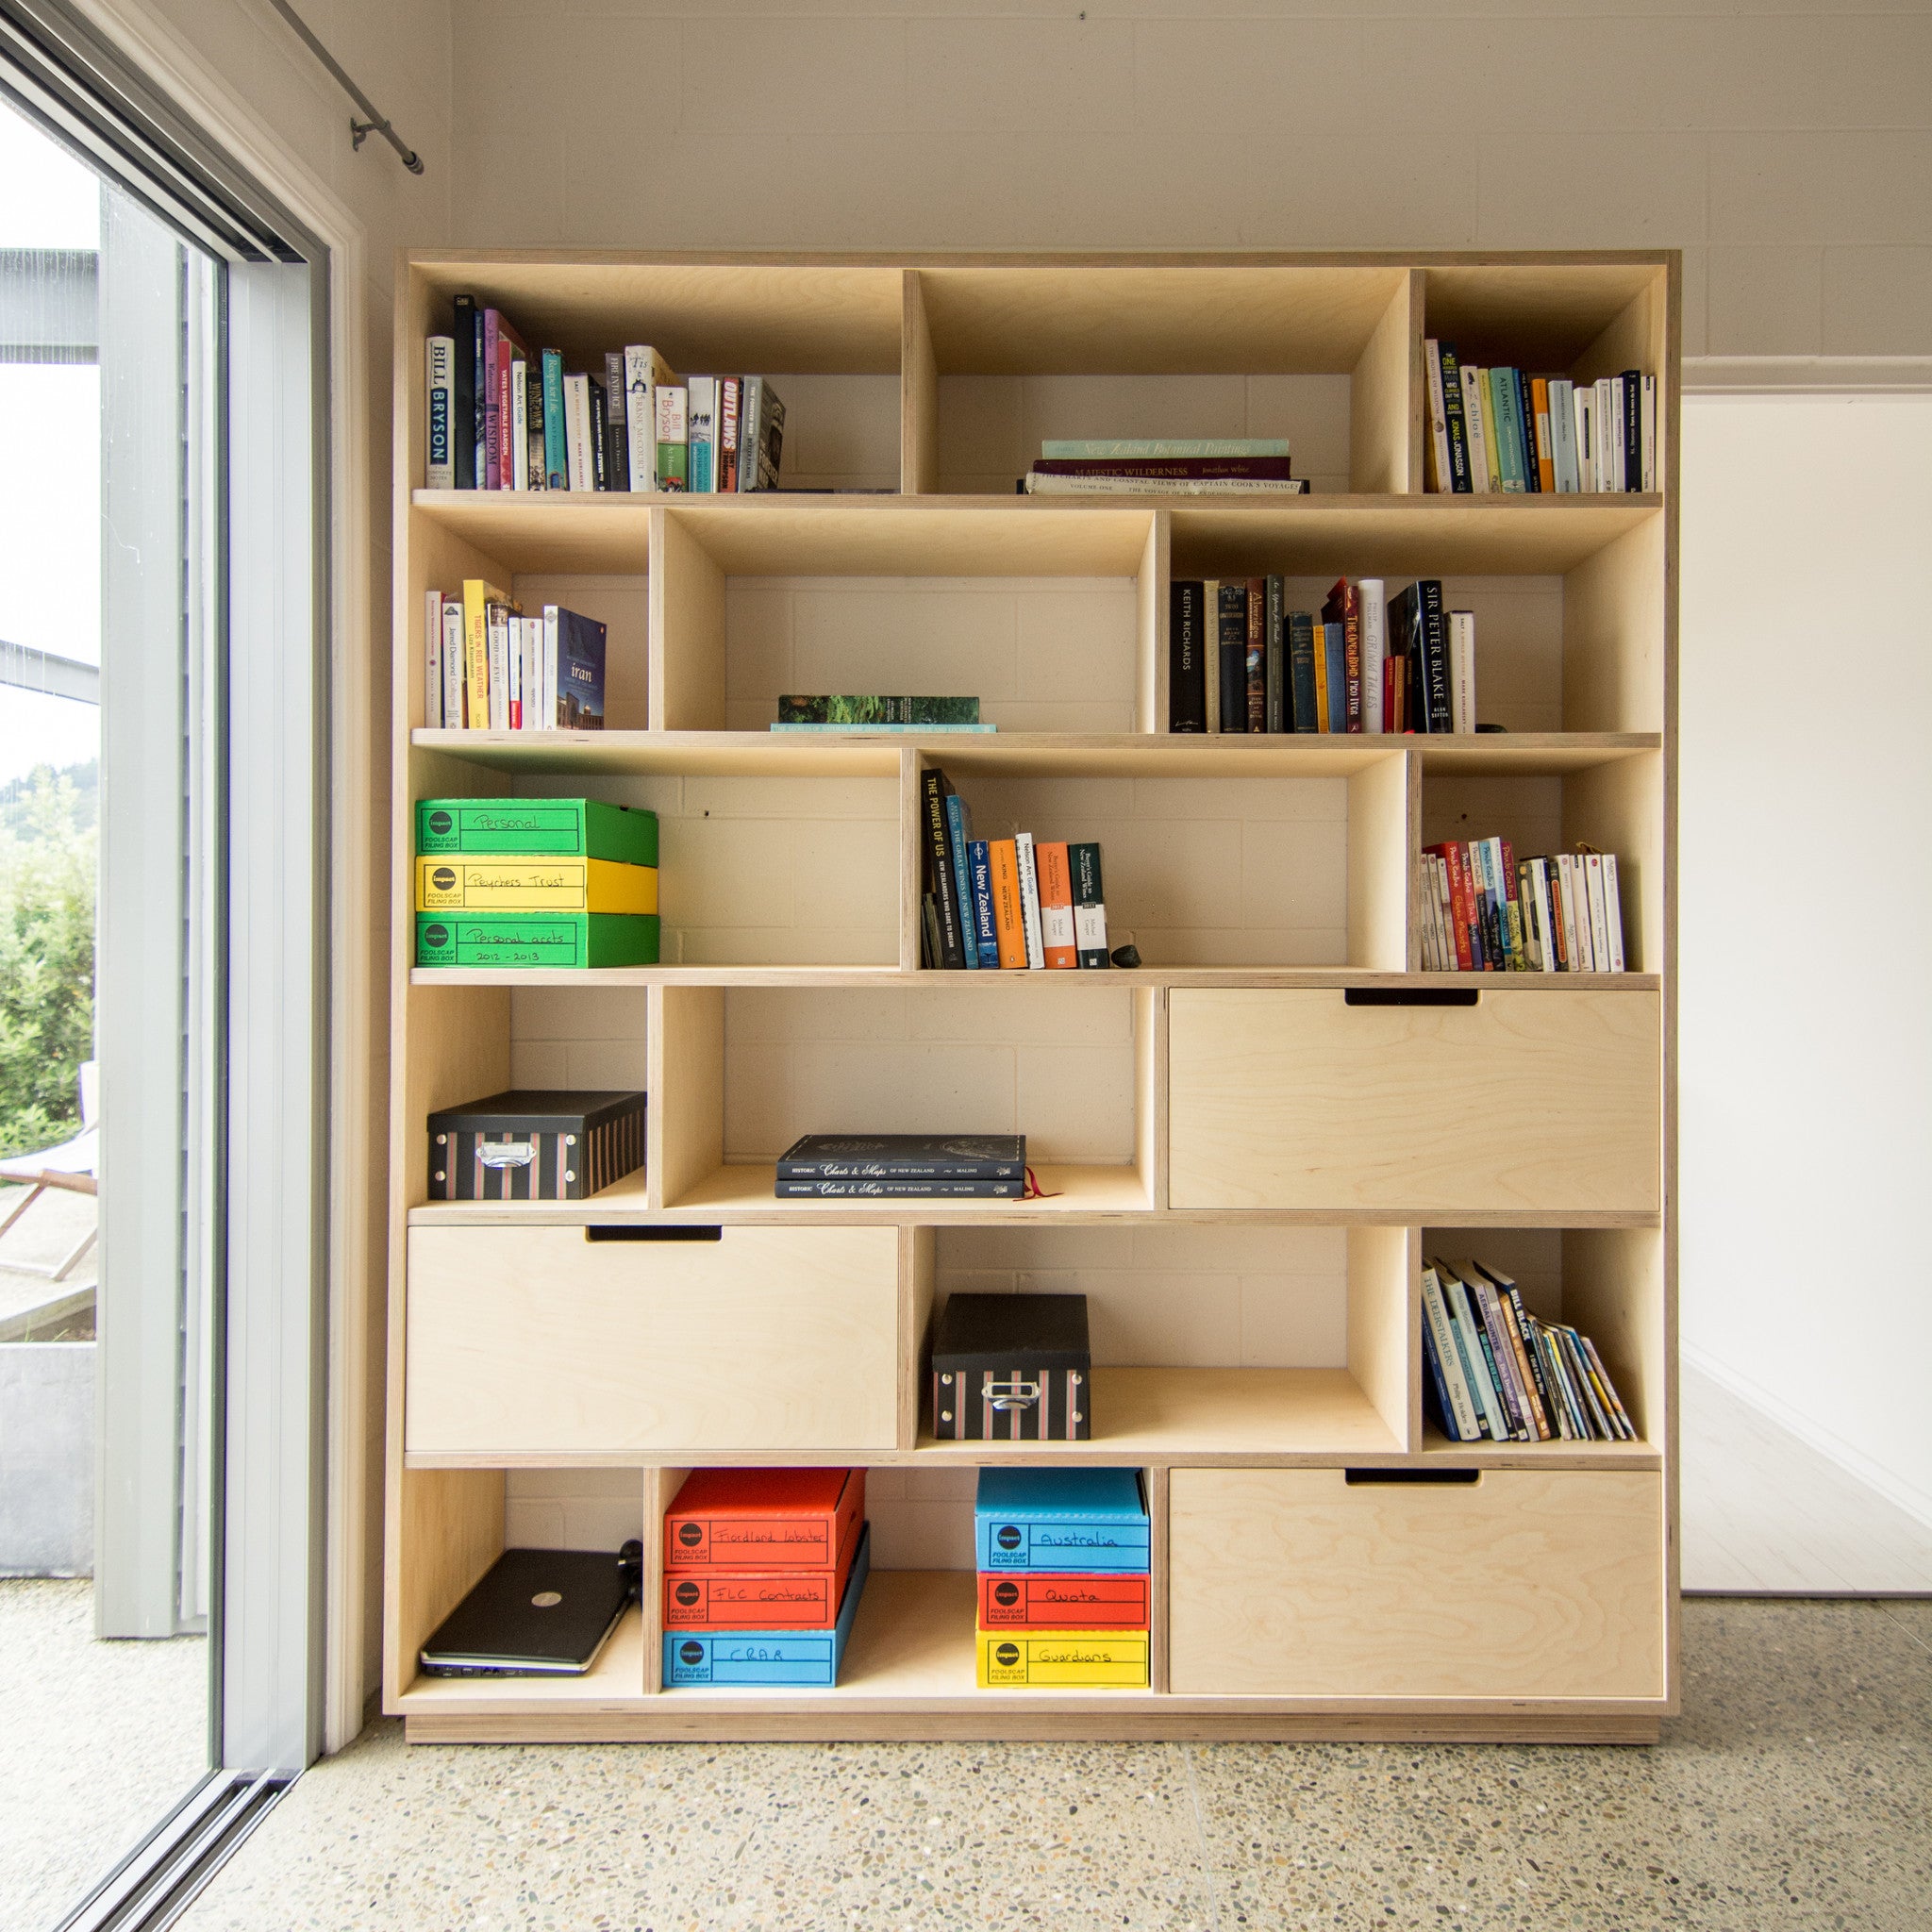 Make Furniture - Combination of bookshelf and office 